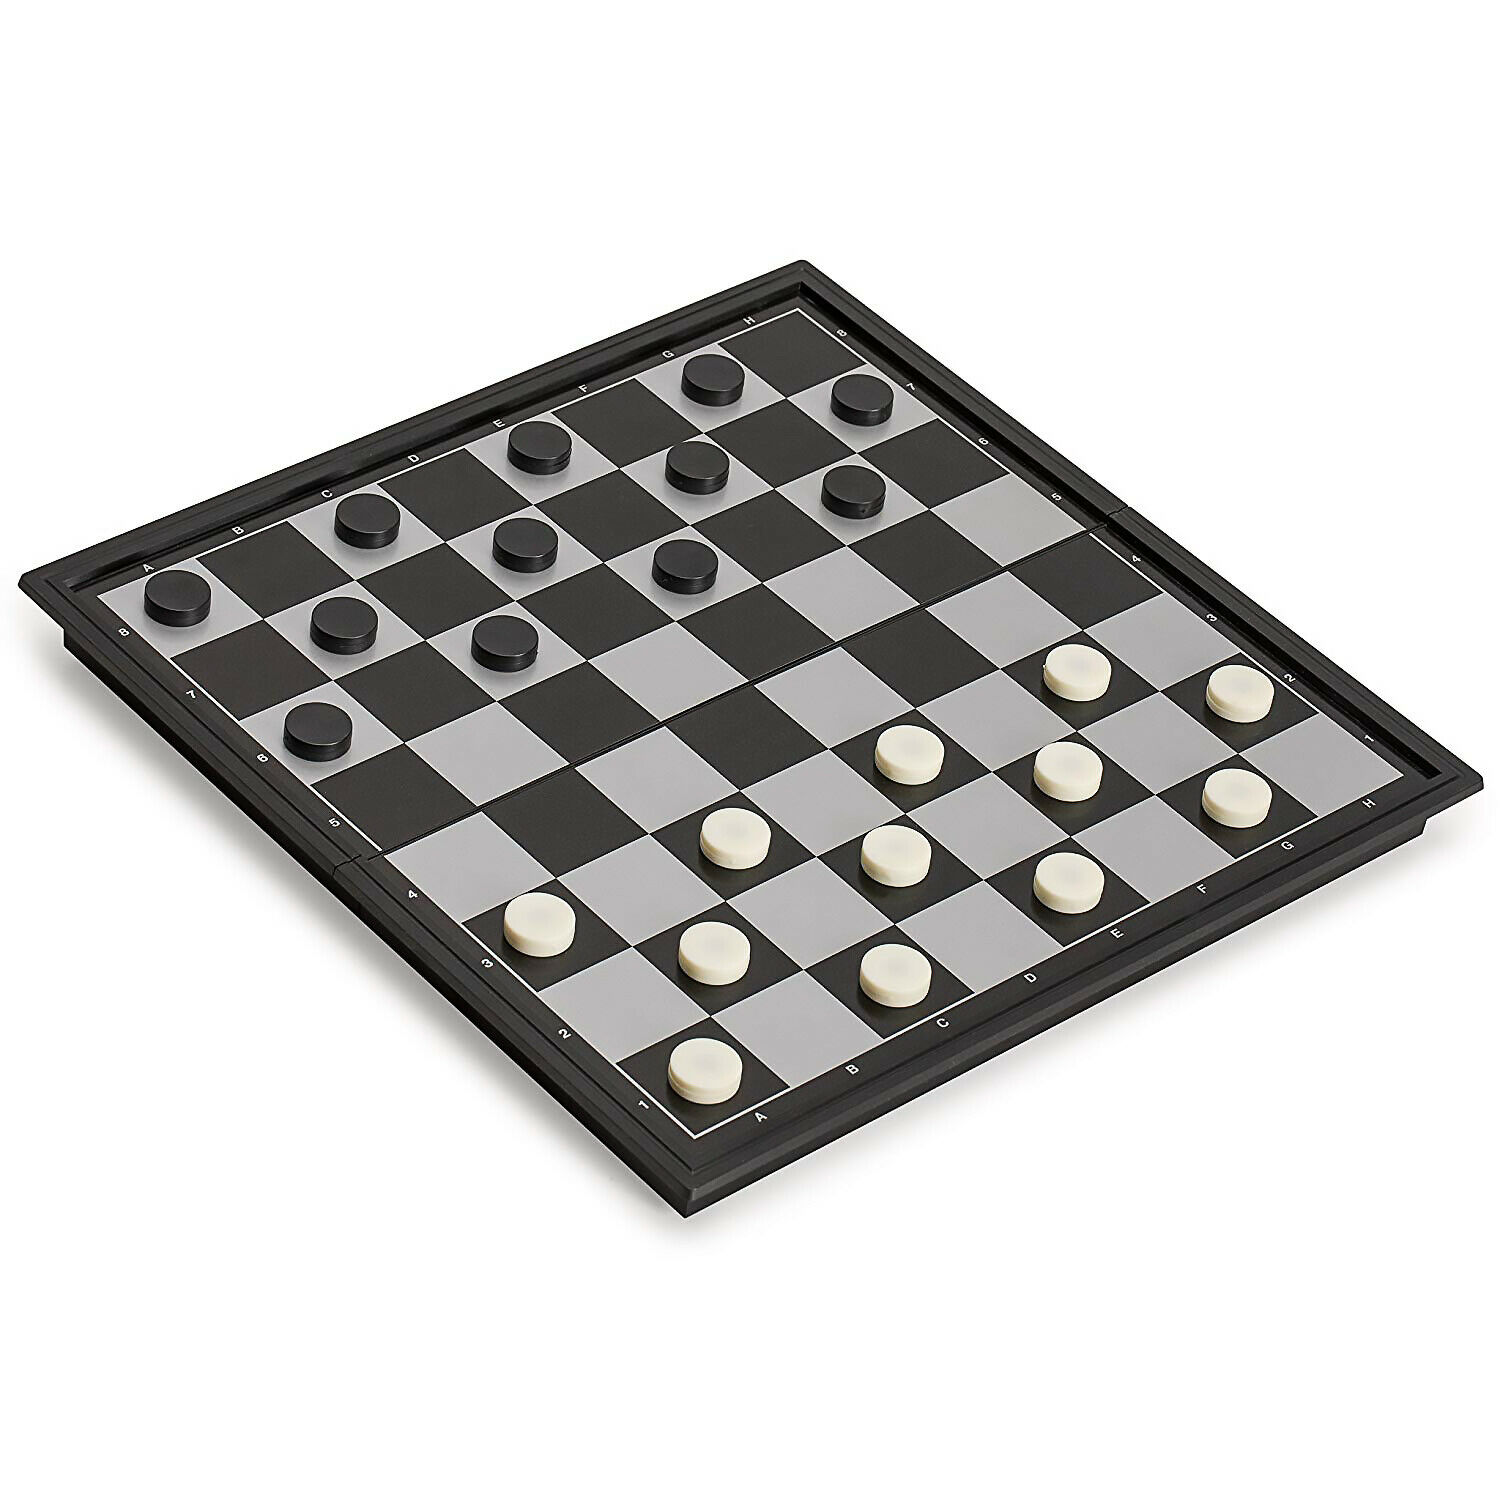 Шашки 3 игра. Шахматы магнитные 3in1 Chess Set 32x32. Шахматы Chess and Checkers. Magnetic 3in1 шахматы. Три игры в одной магнитные 3in1 Chess Set.